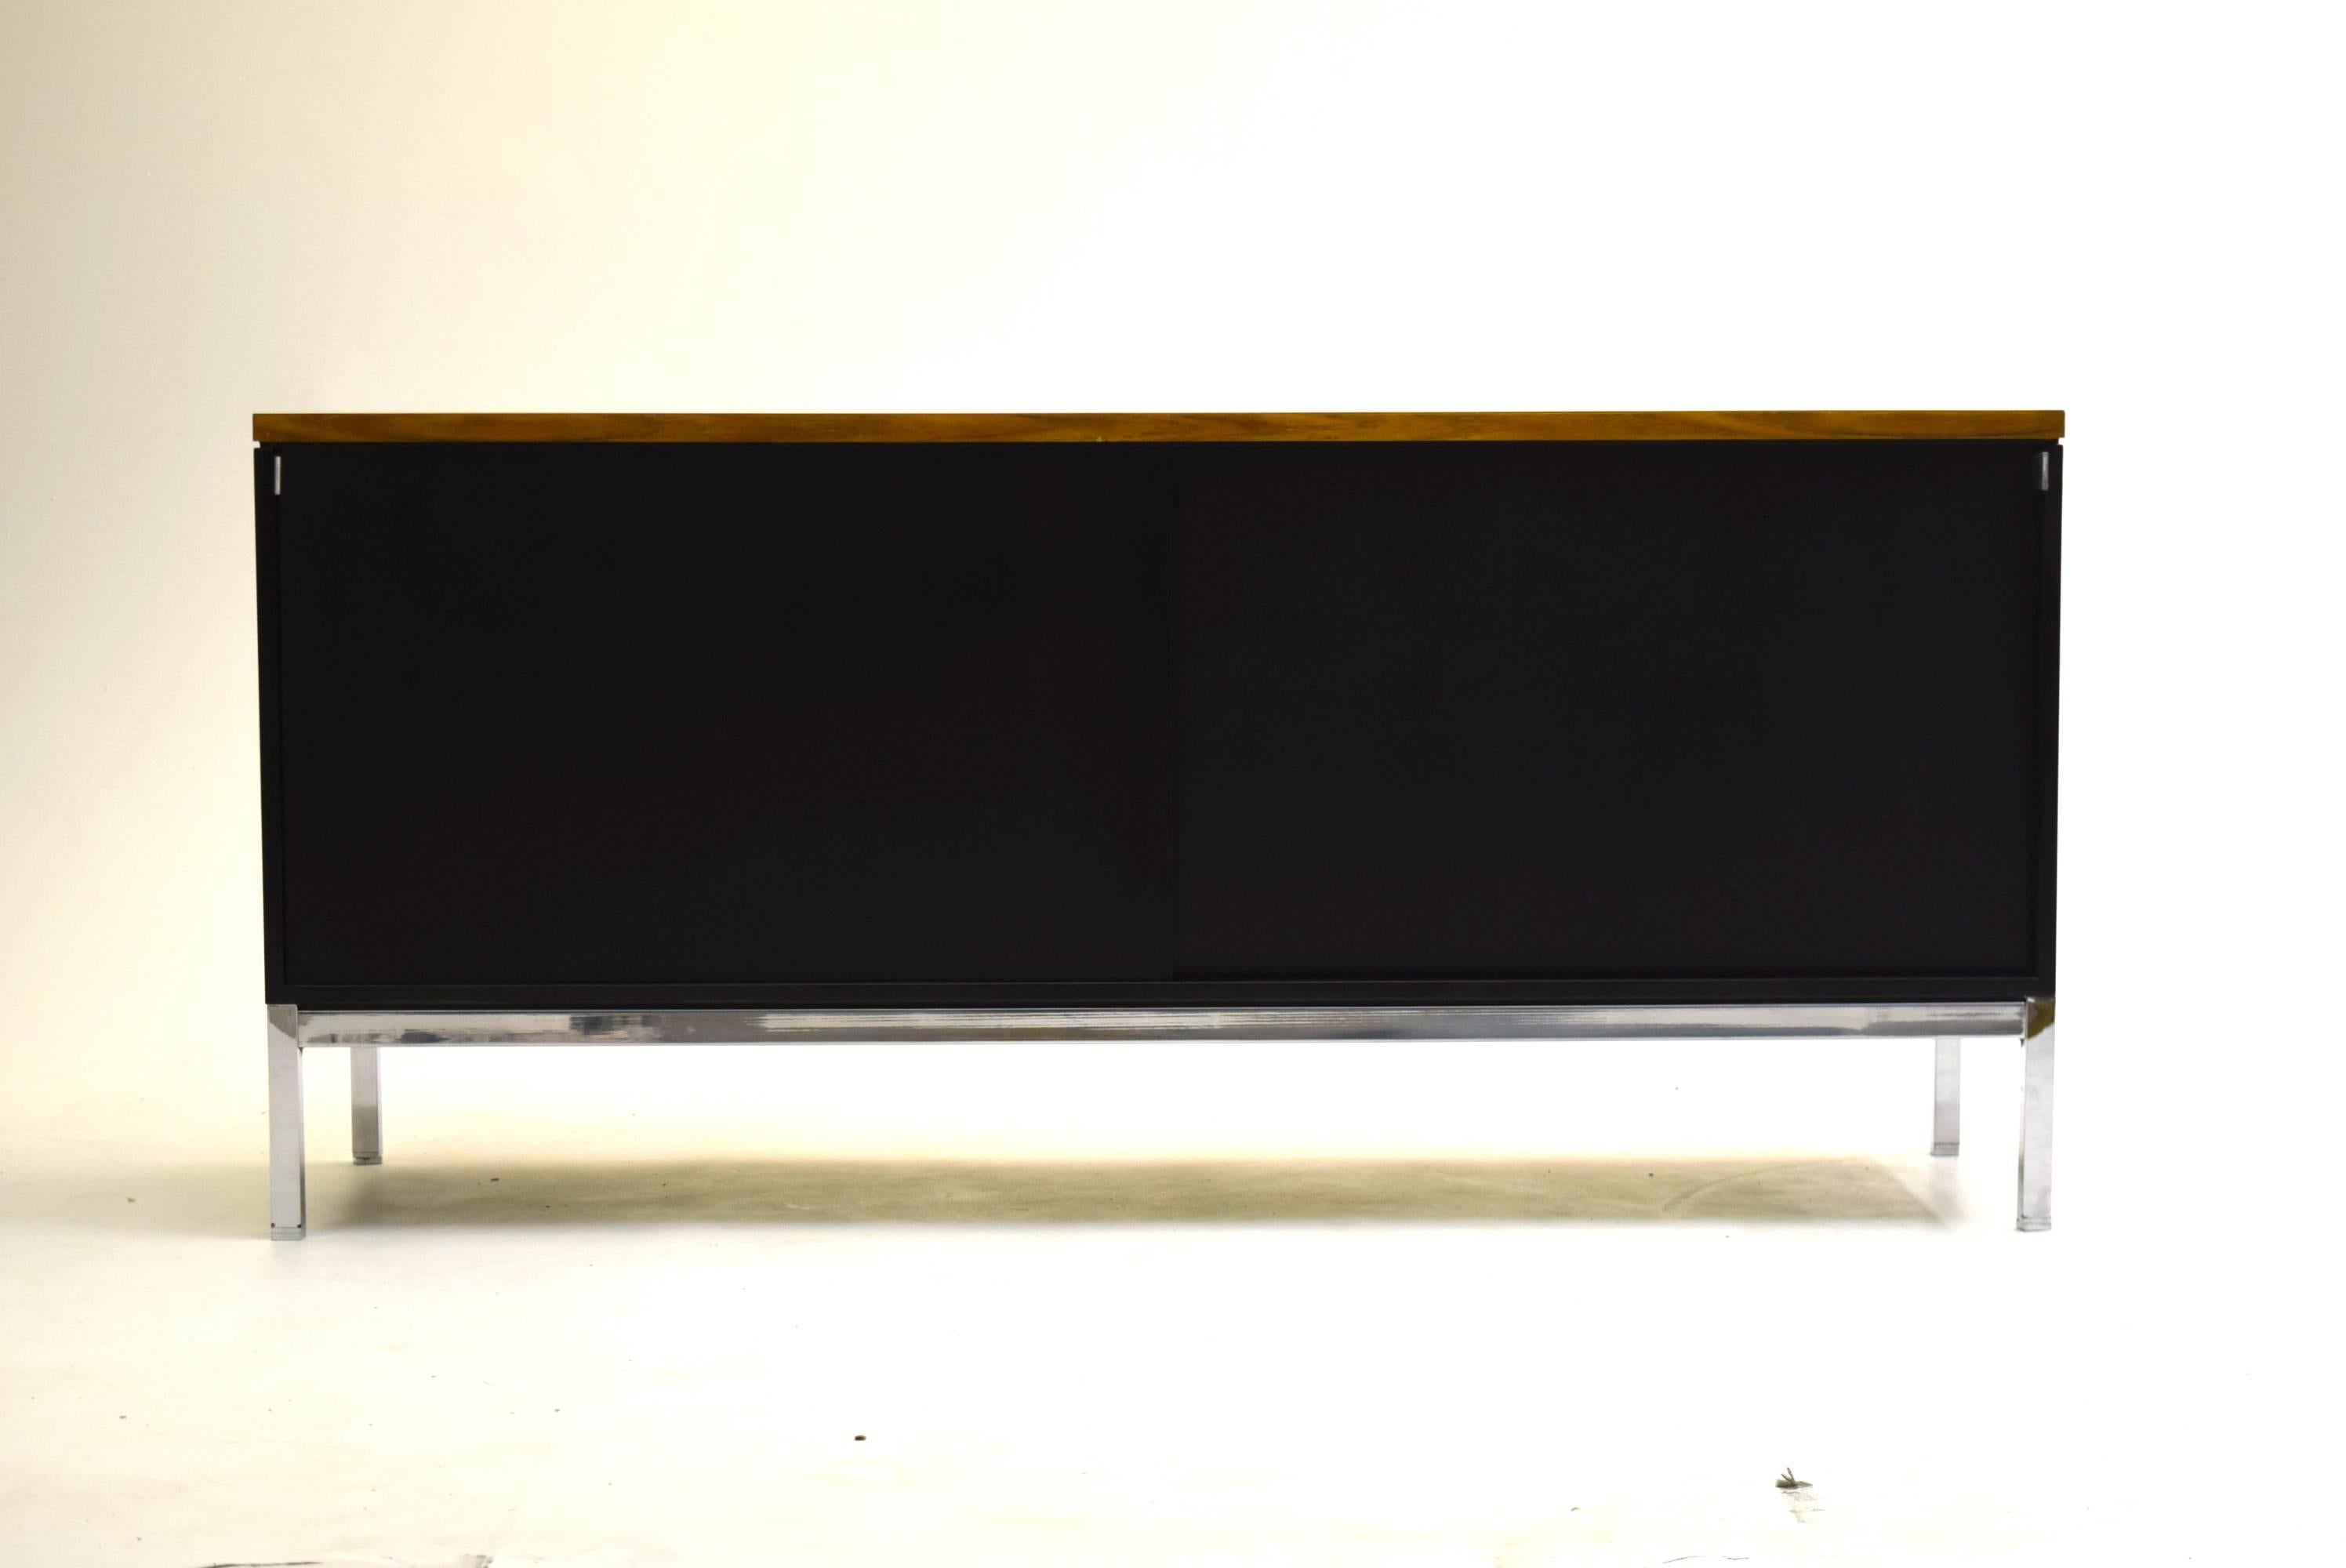 By Florence Knoll, produced circa 1959-1965. 

Measures: 27.5" tall, 60" wide and 18" deep. Fully finished on all sides for placement anywhere.

This credenza contains two adjustable shelves, two file drawers and two pencil